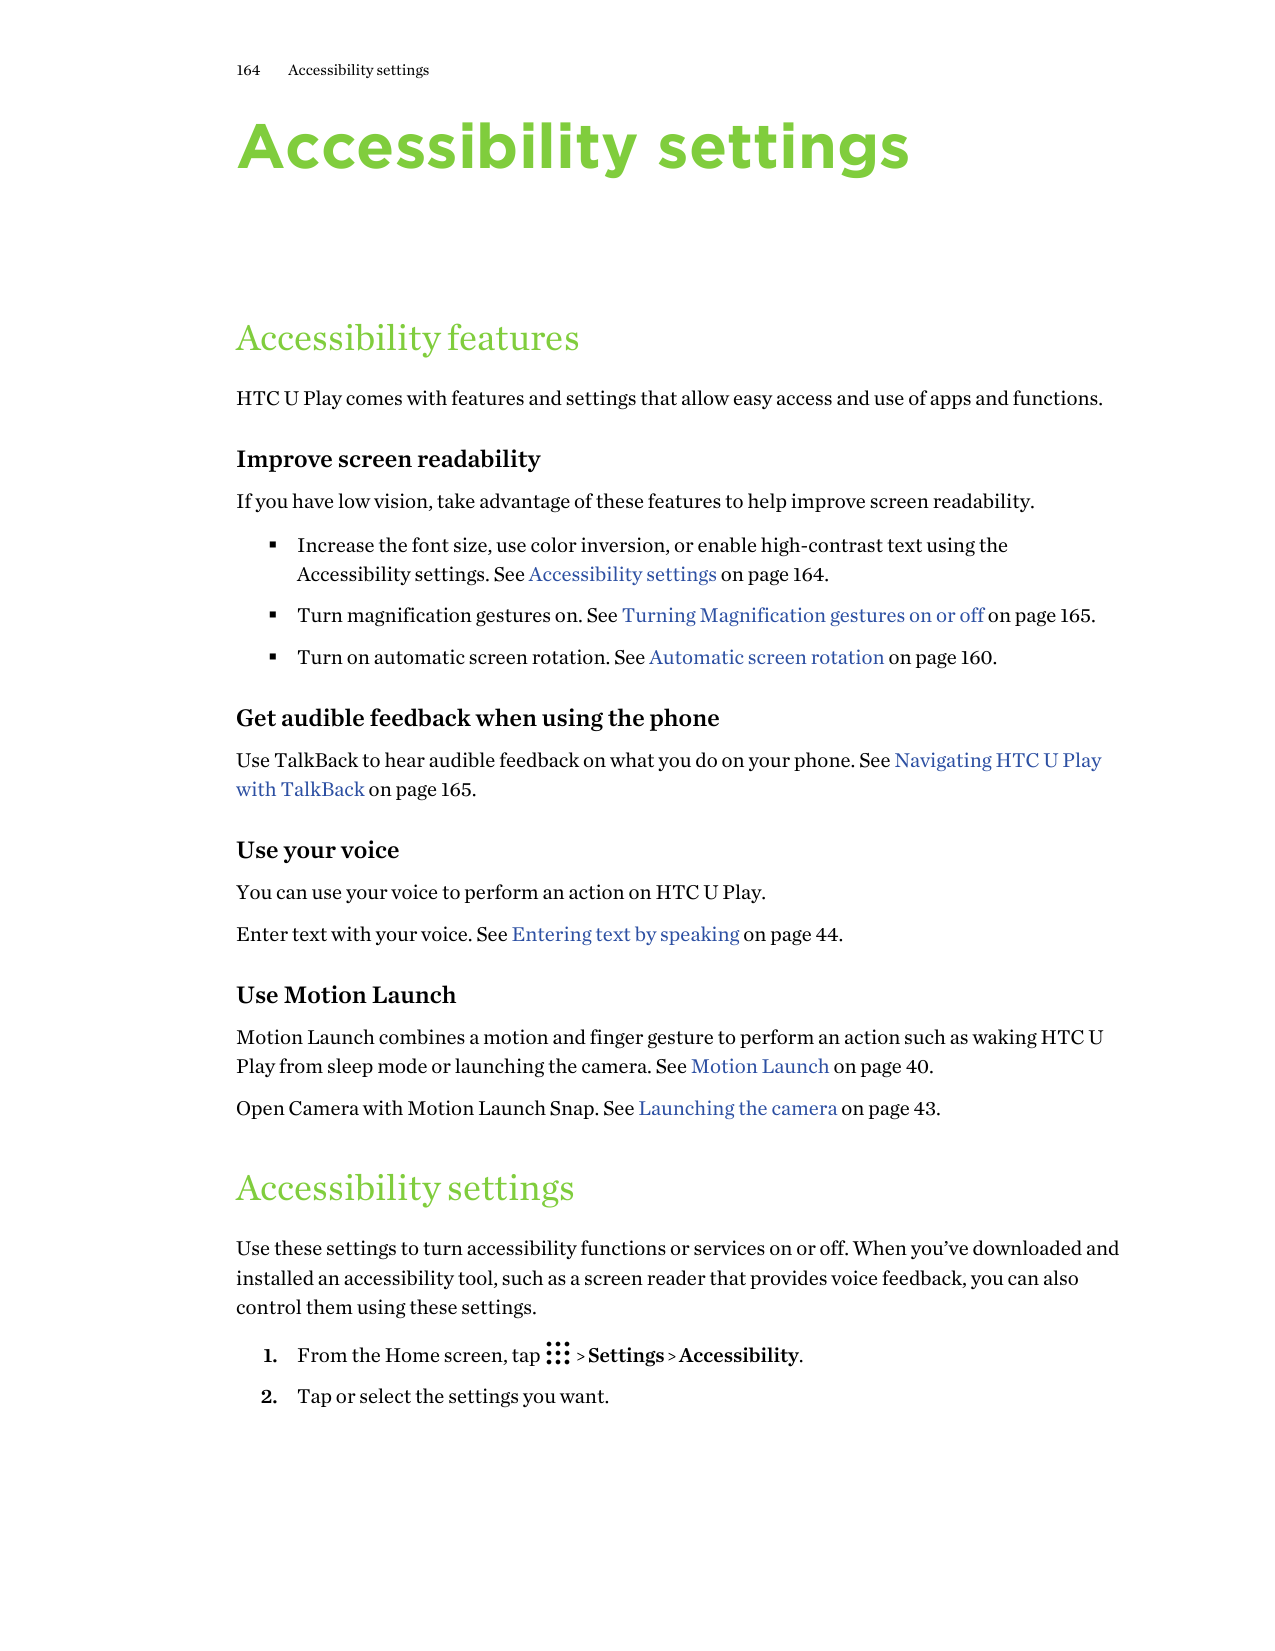 164Accessibility settingsAccessibility settingsAccessibility featuresHTC U Play comes with features and settings that allow easy